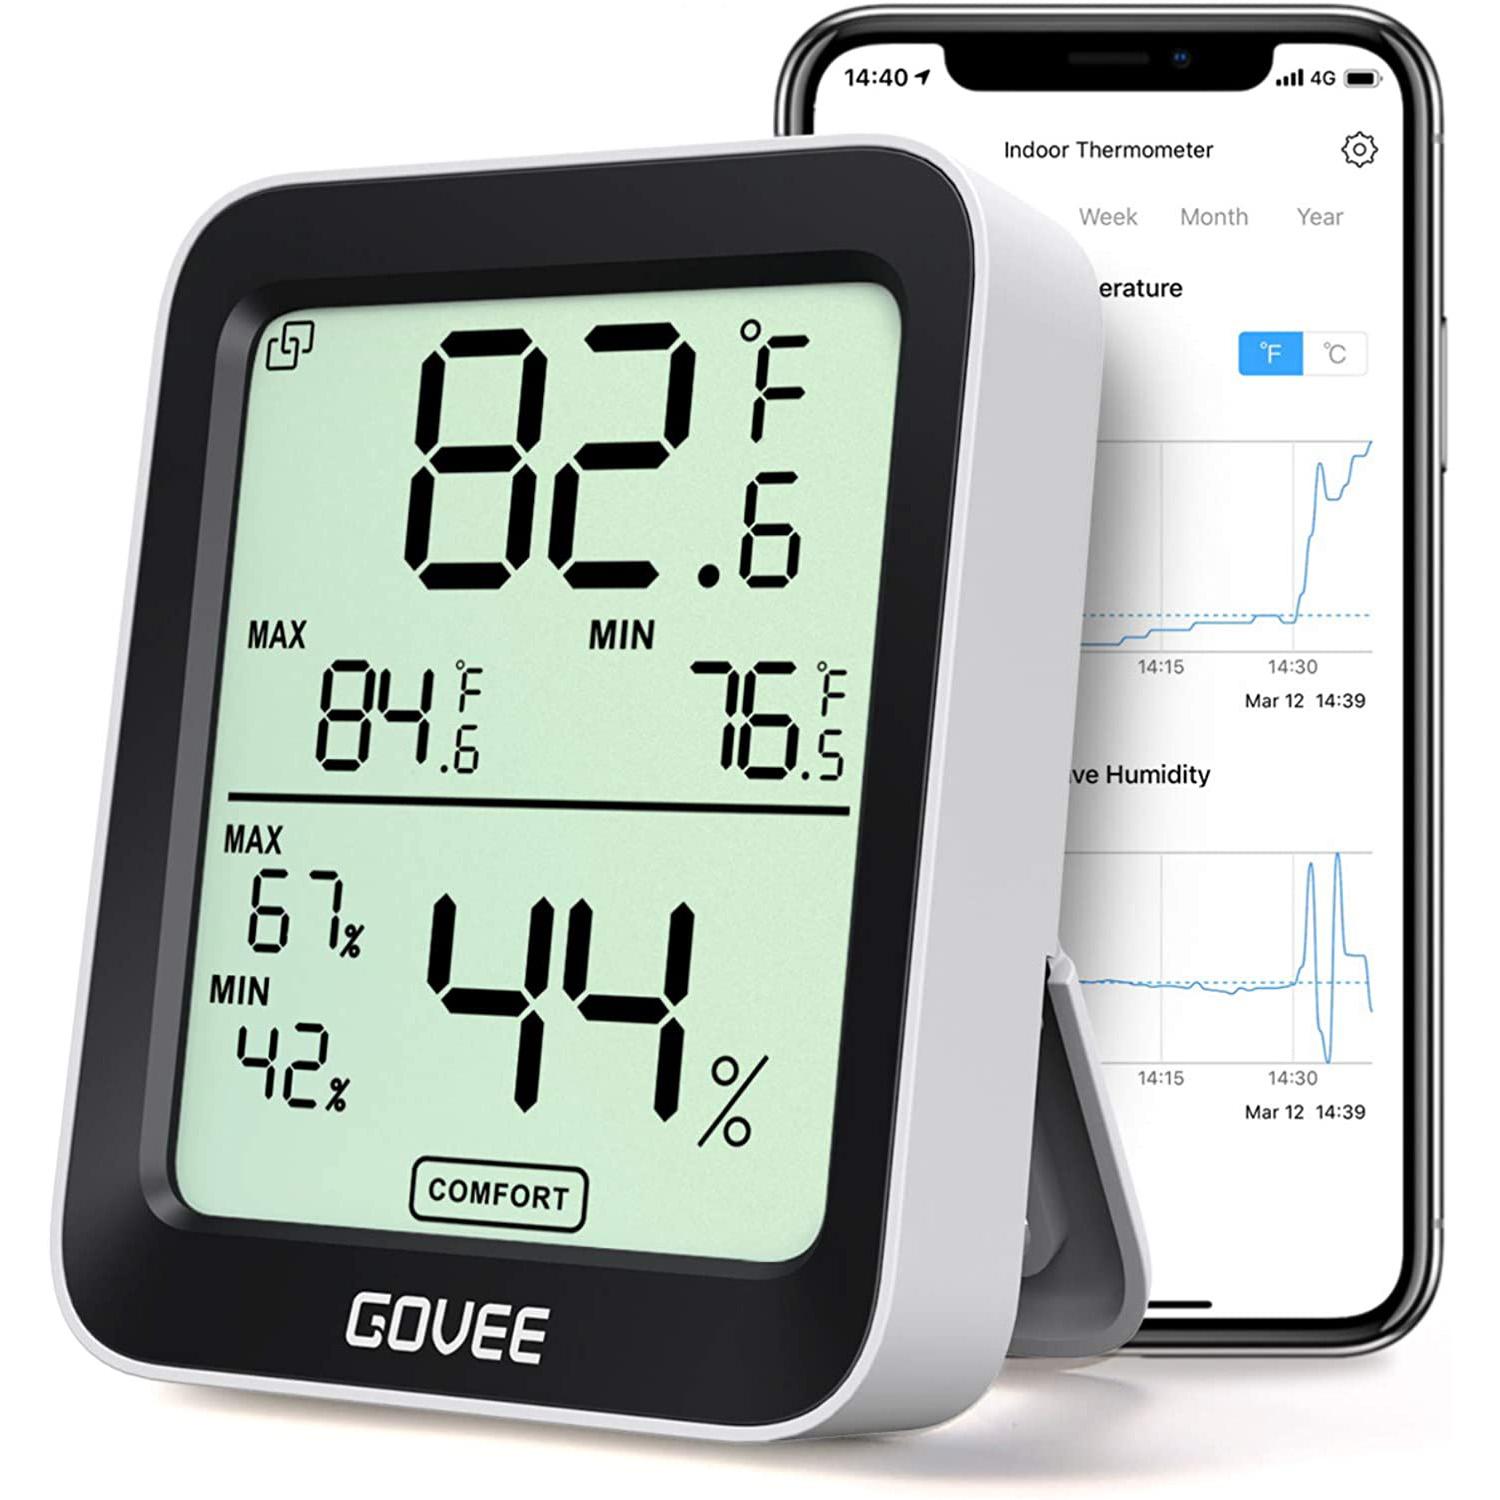 Govee Indoor Smart Thermometer and Humidity Gauge for $7.79